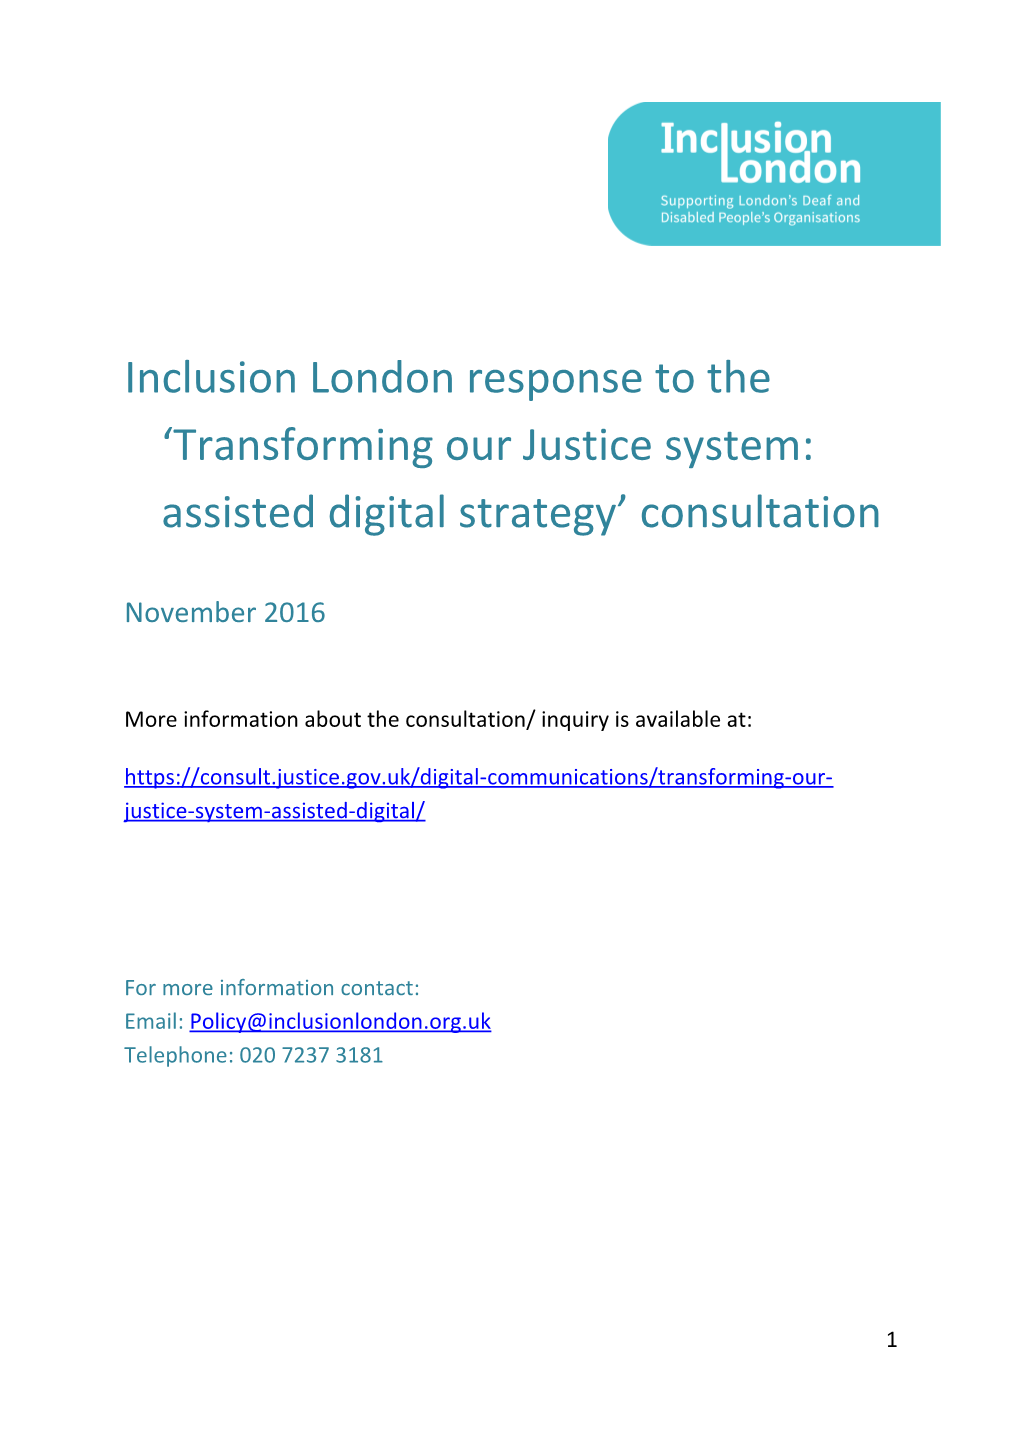 Inclusion London Response to the Transforming Our Justice System: Assisted Digital Strategy